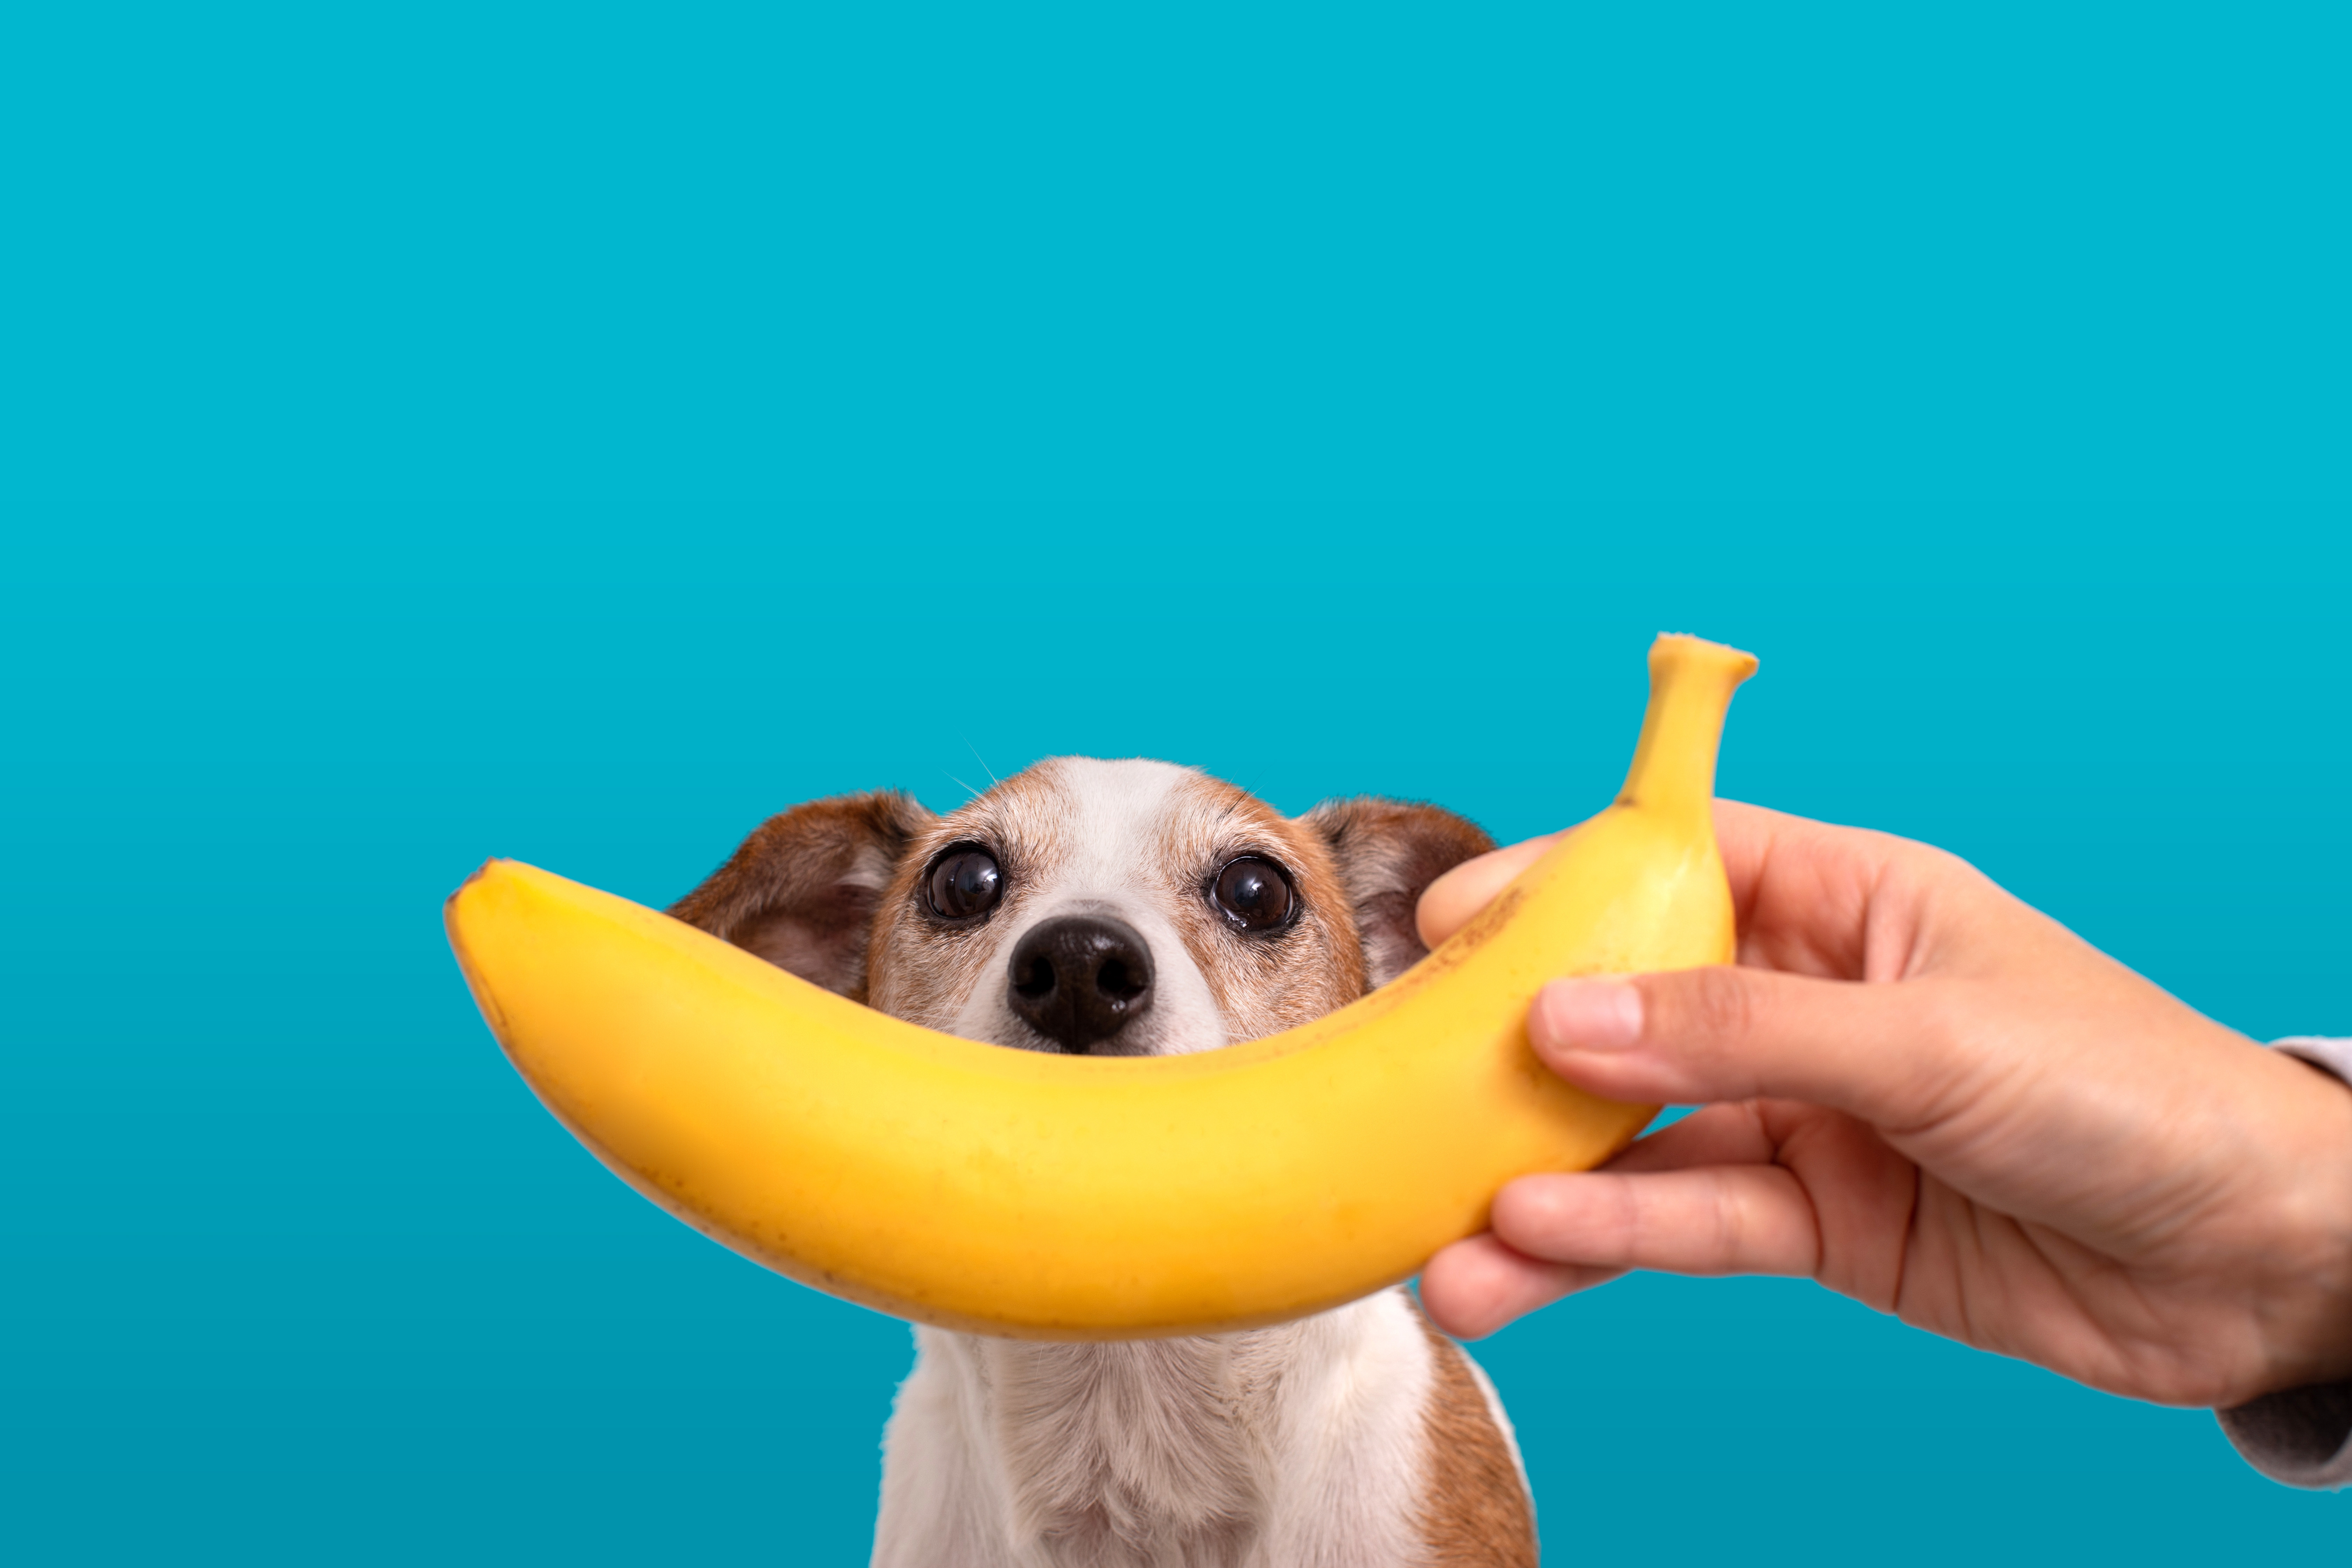 Nutritious Treats for Your Pup